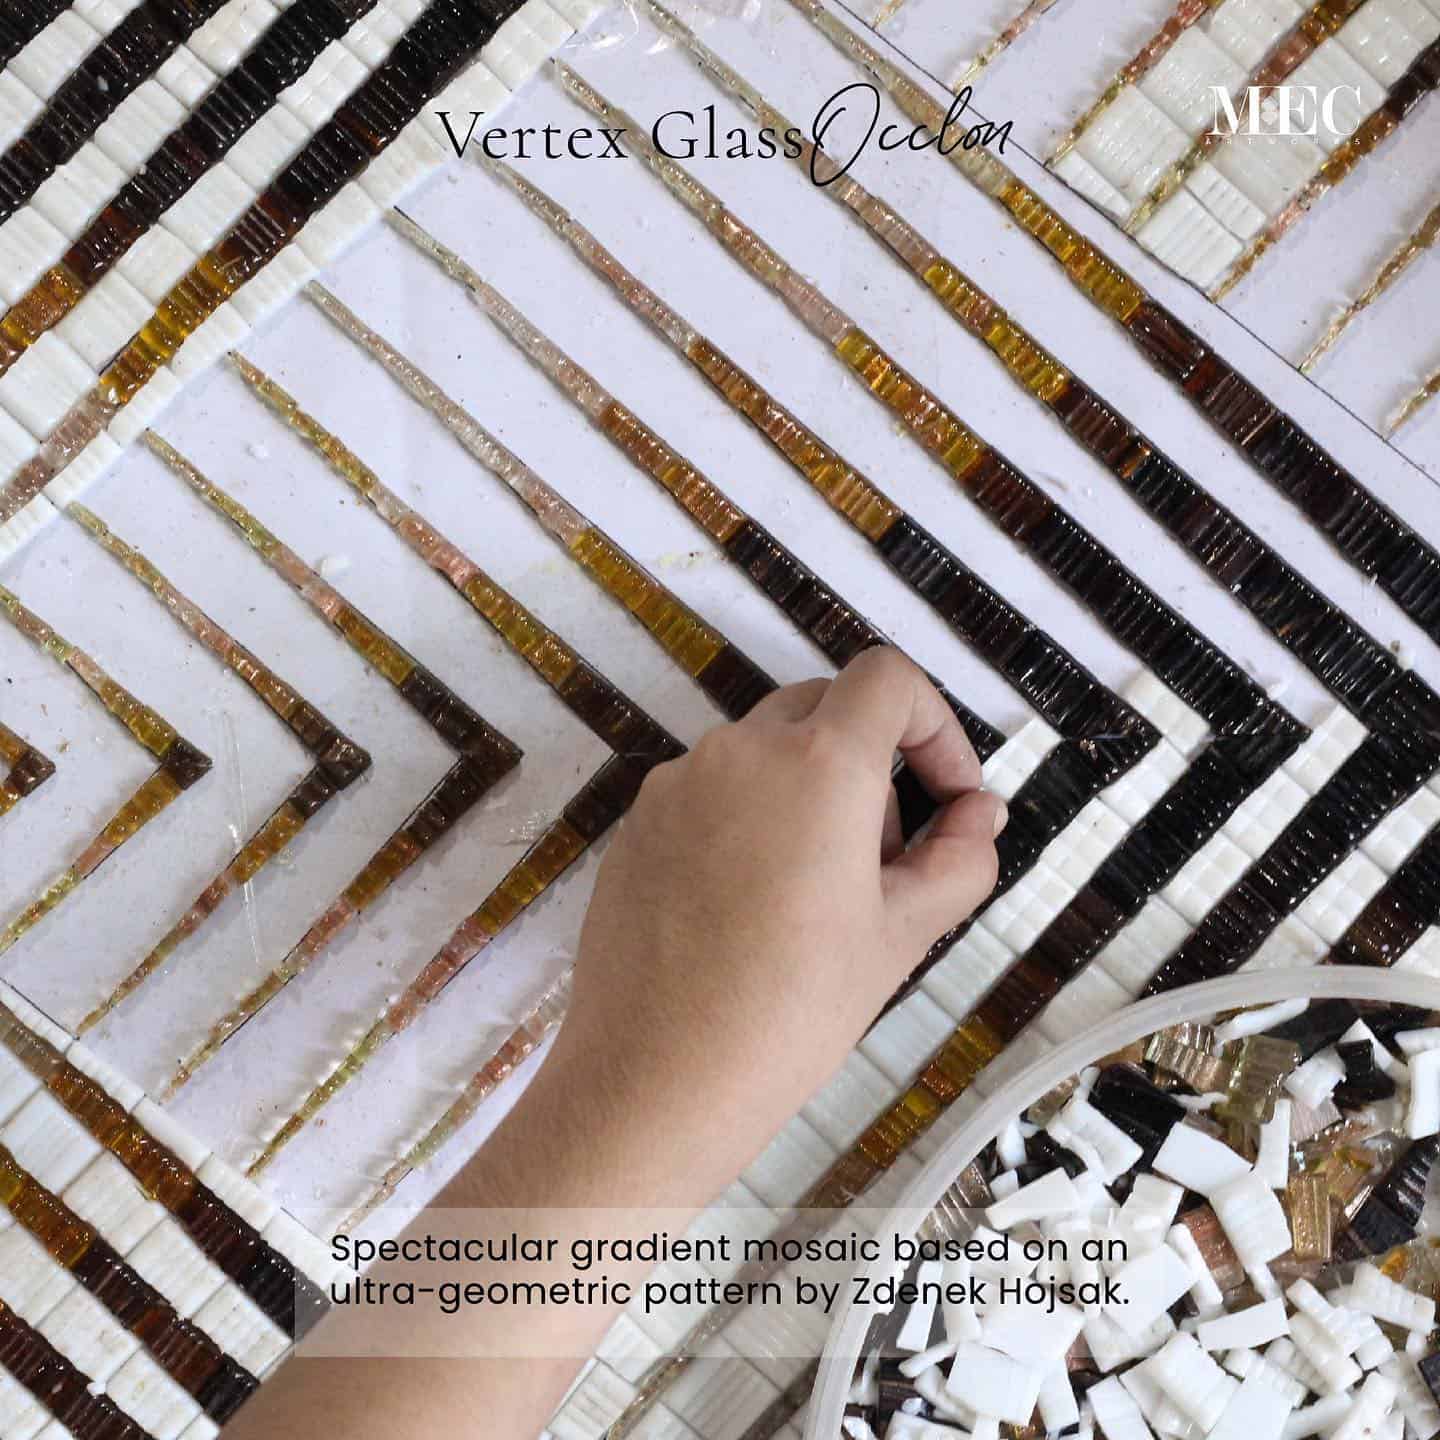 Occlon brown ombre glass mosaic artwork being prepared with handcut tiles